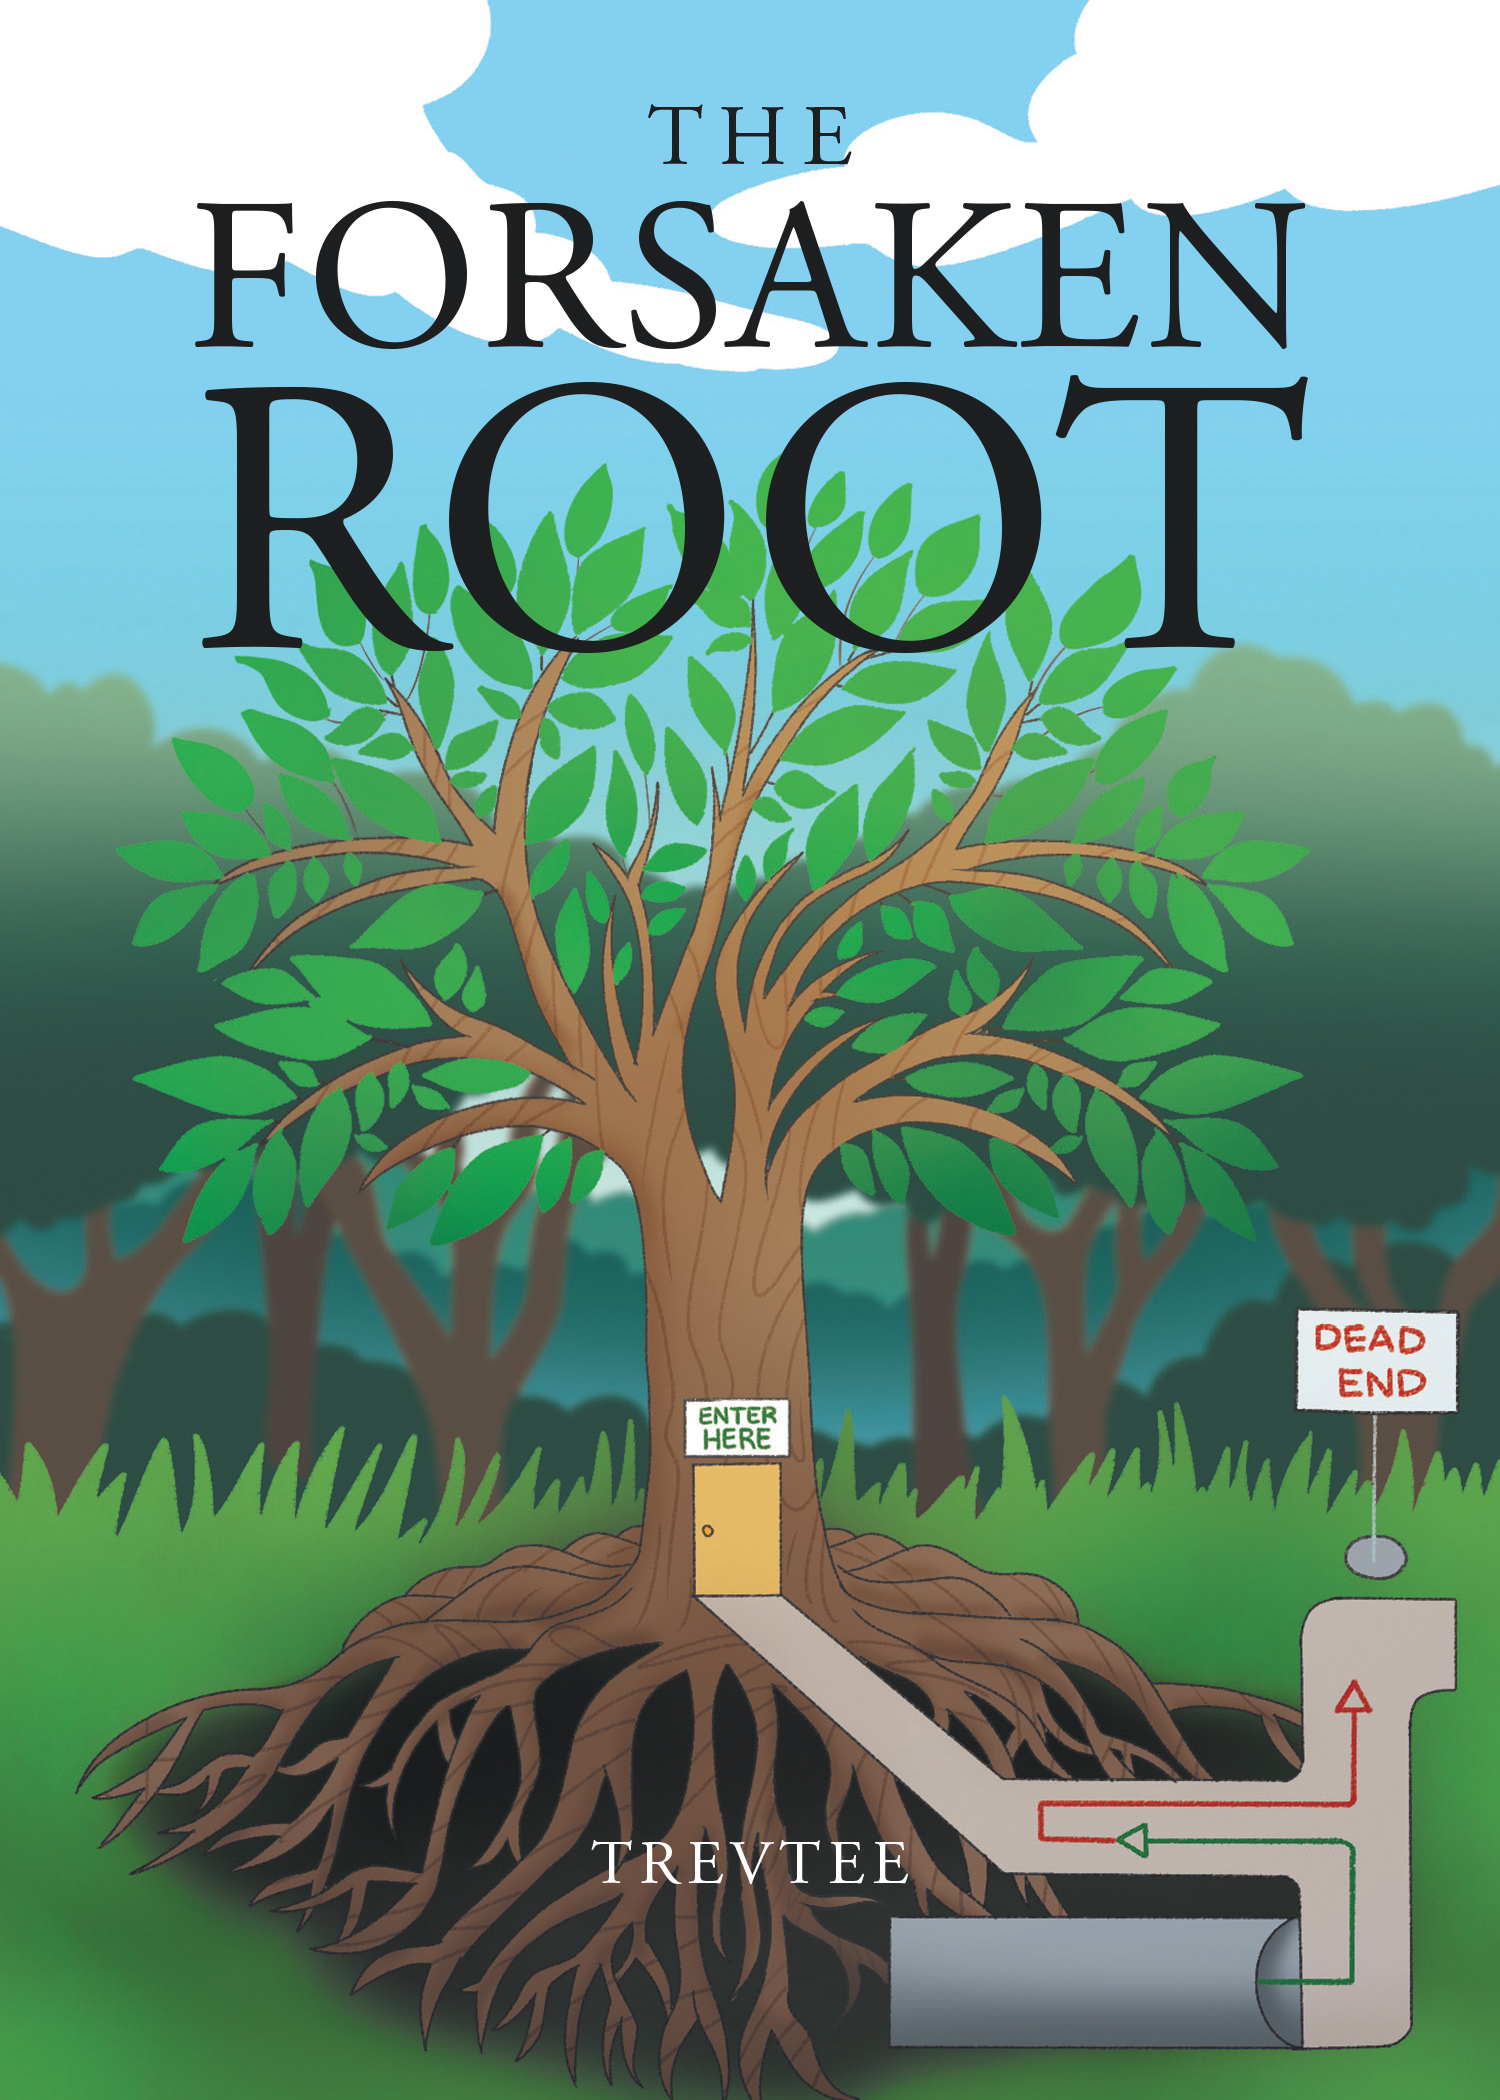 Author Trevtee’s New Book, "The Forsaken Root," is a Spiritual Work That Brings God Into the Hearts and Minds of Readers Looking for Enlightenment